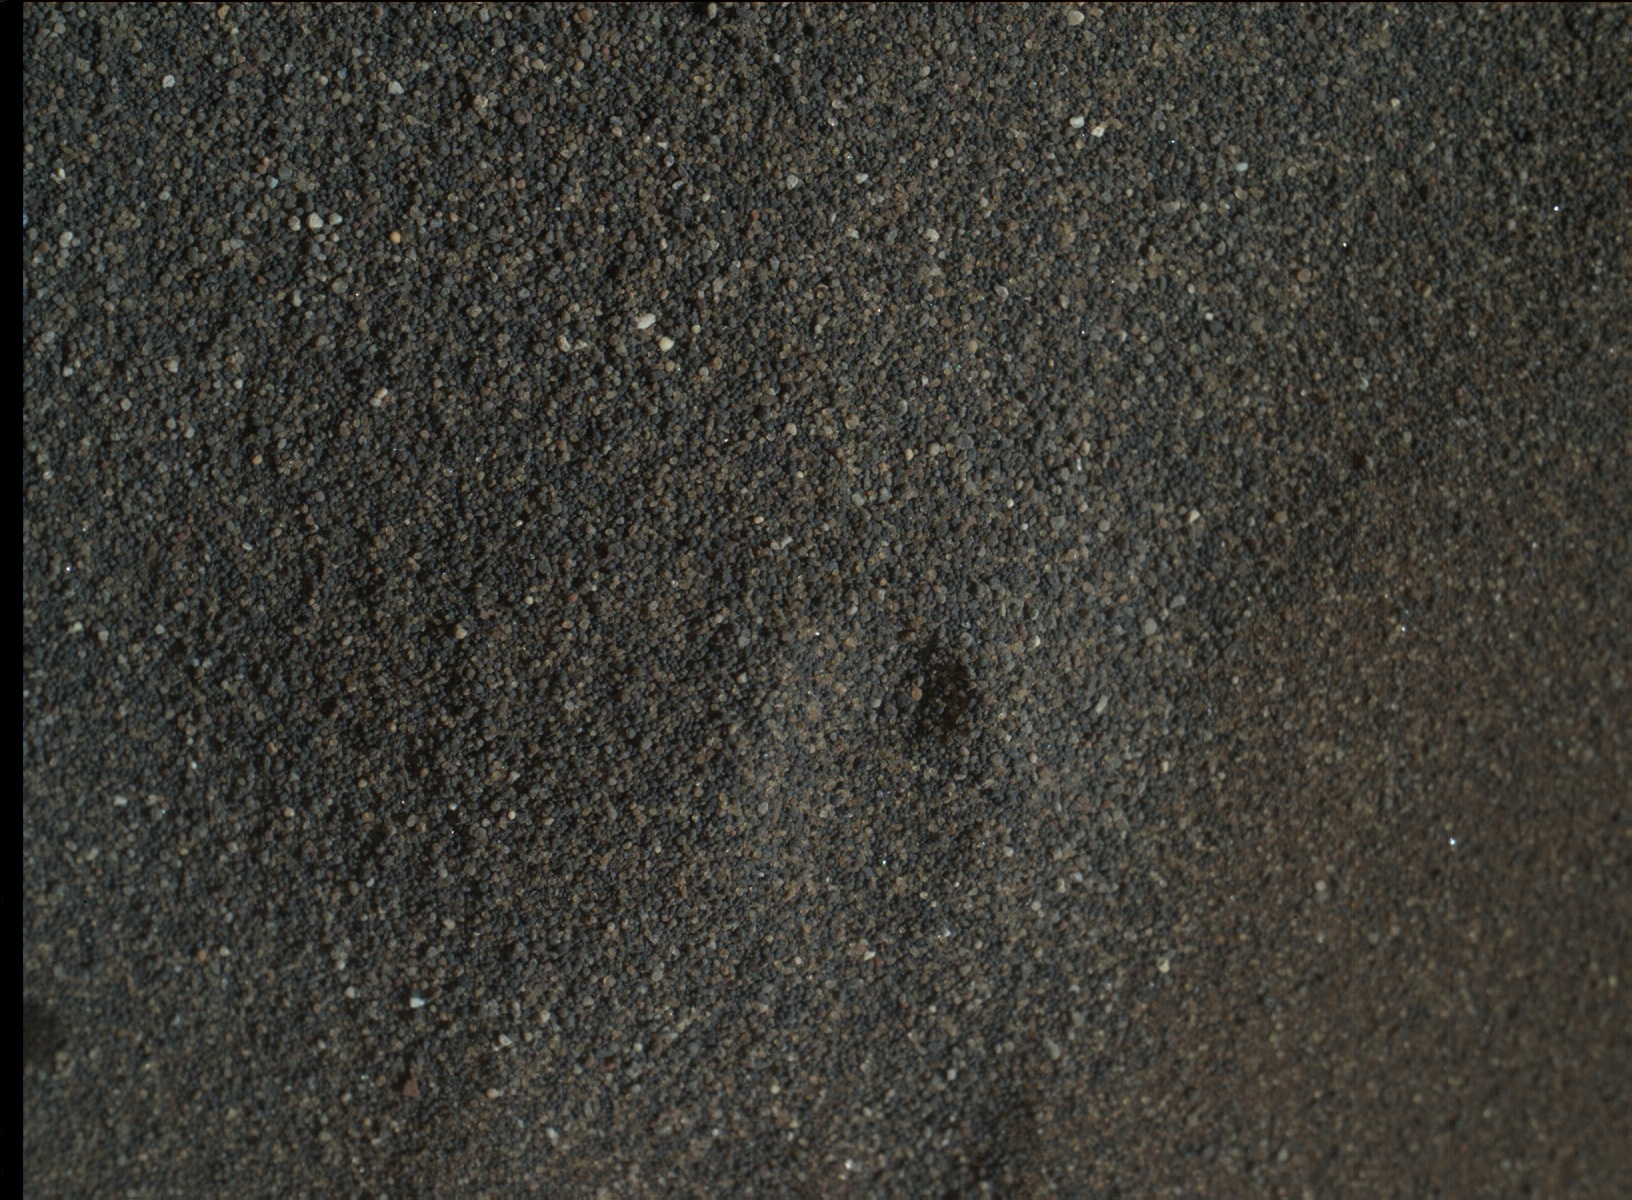 Nasa's Mars rover Curiosity acquired this image using its Mars Hand Lens Imager (MAHLI) on Sol 1242